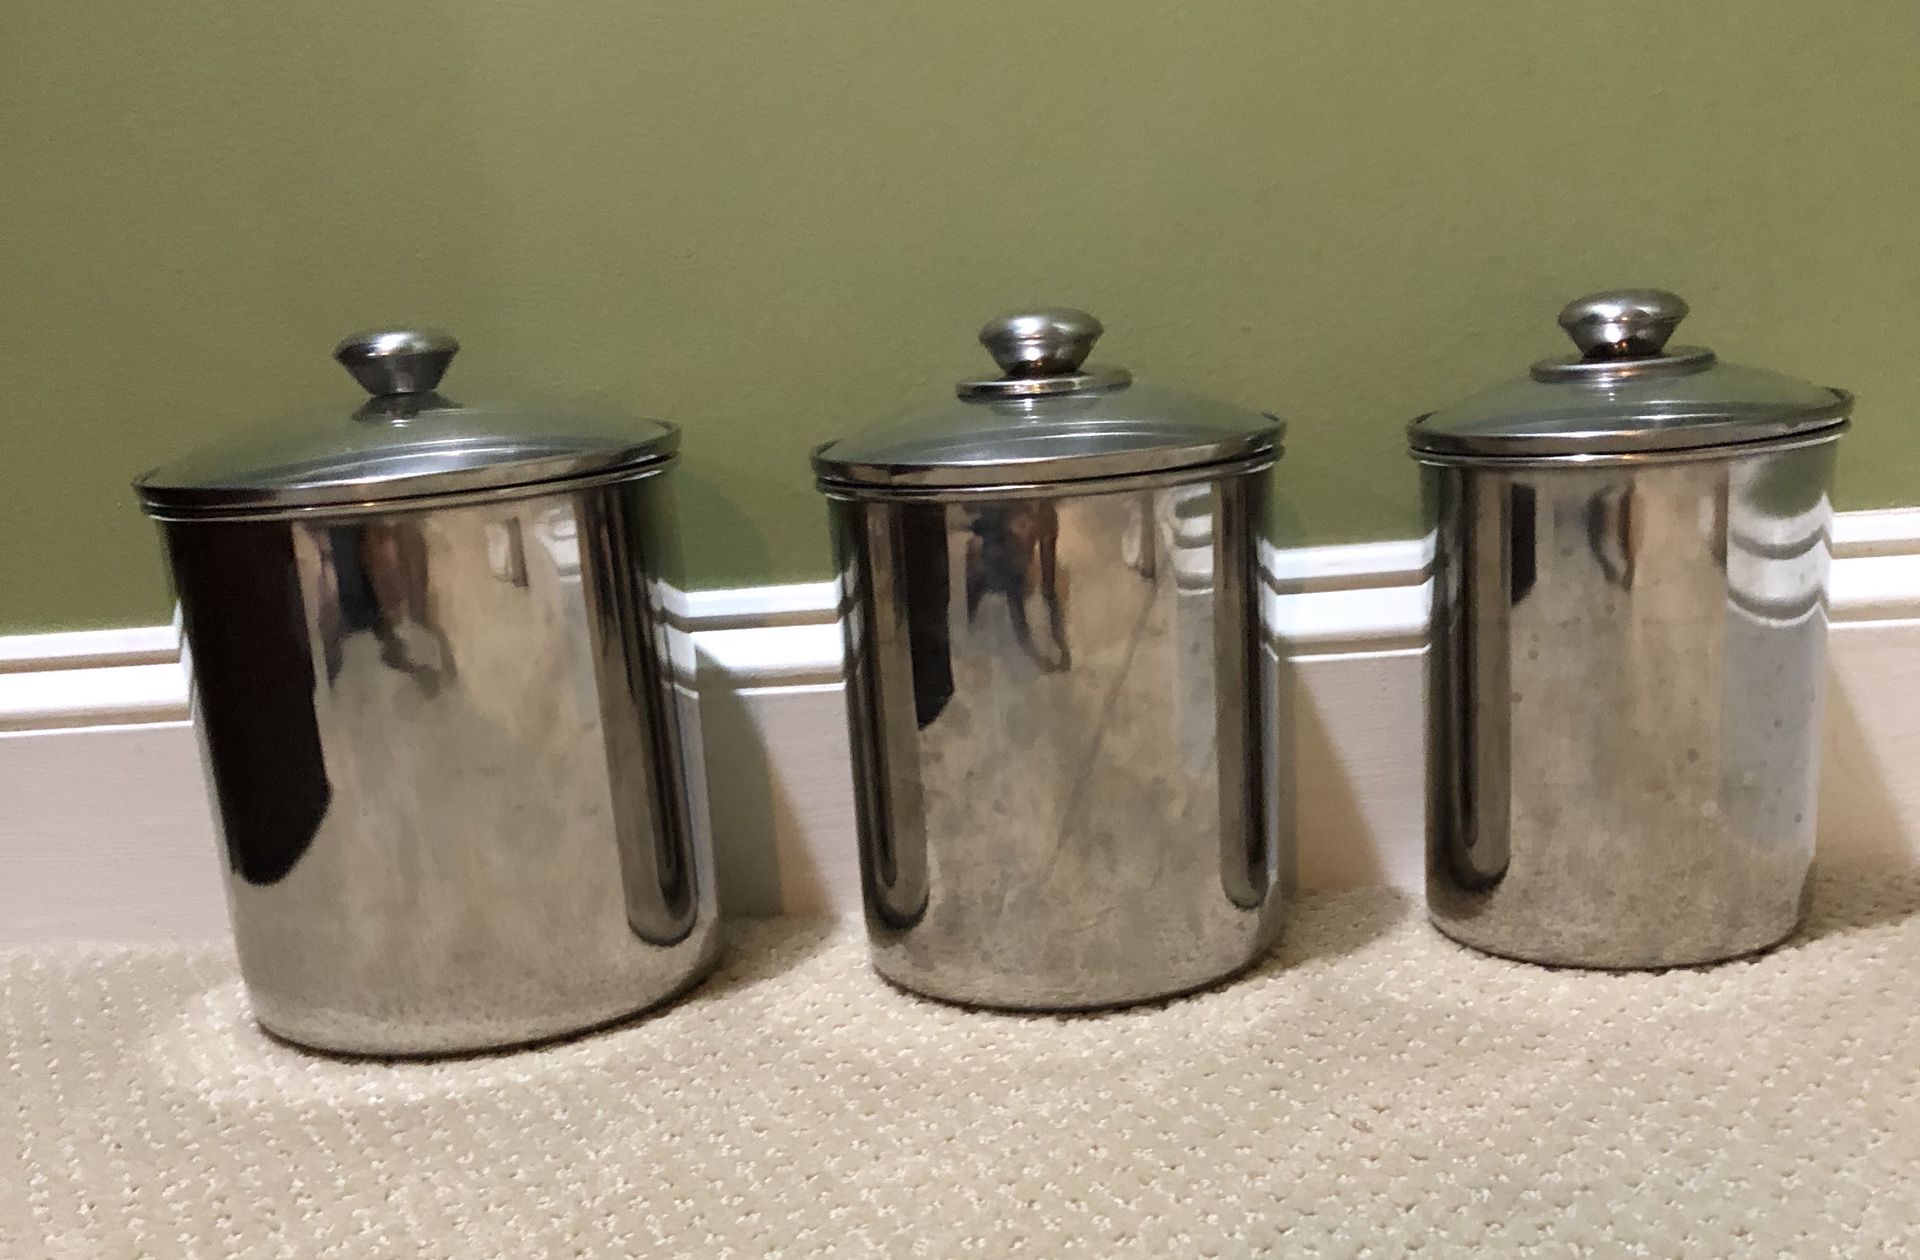 Stainless Steel Canisters - Moving Sale